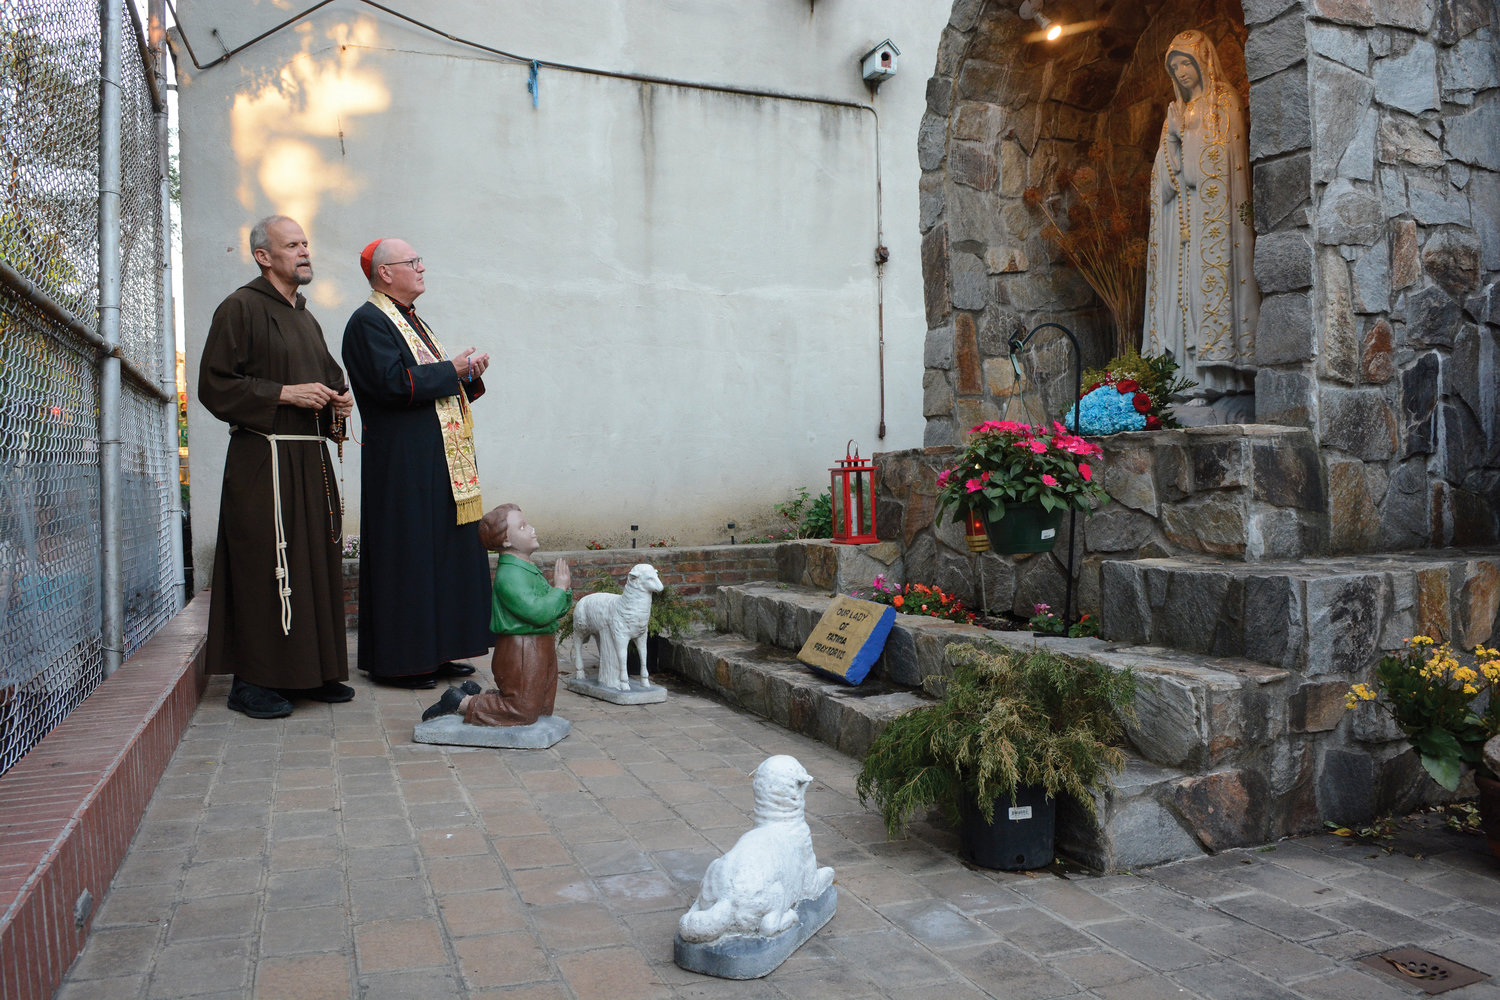 Cardinal Dolan and Father Thomas McNamara, O.F.M. Cap., pastor of Our Lady of Sorrows parish in Manhattan, pray the Rosary outdoors in the early evening May 31 at the parish’s Our Lady of Fatima Grotto.